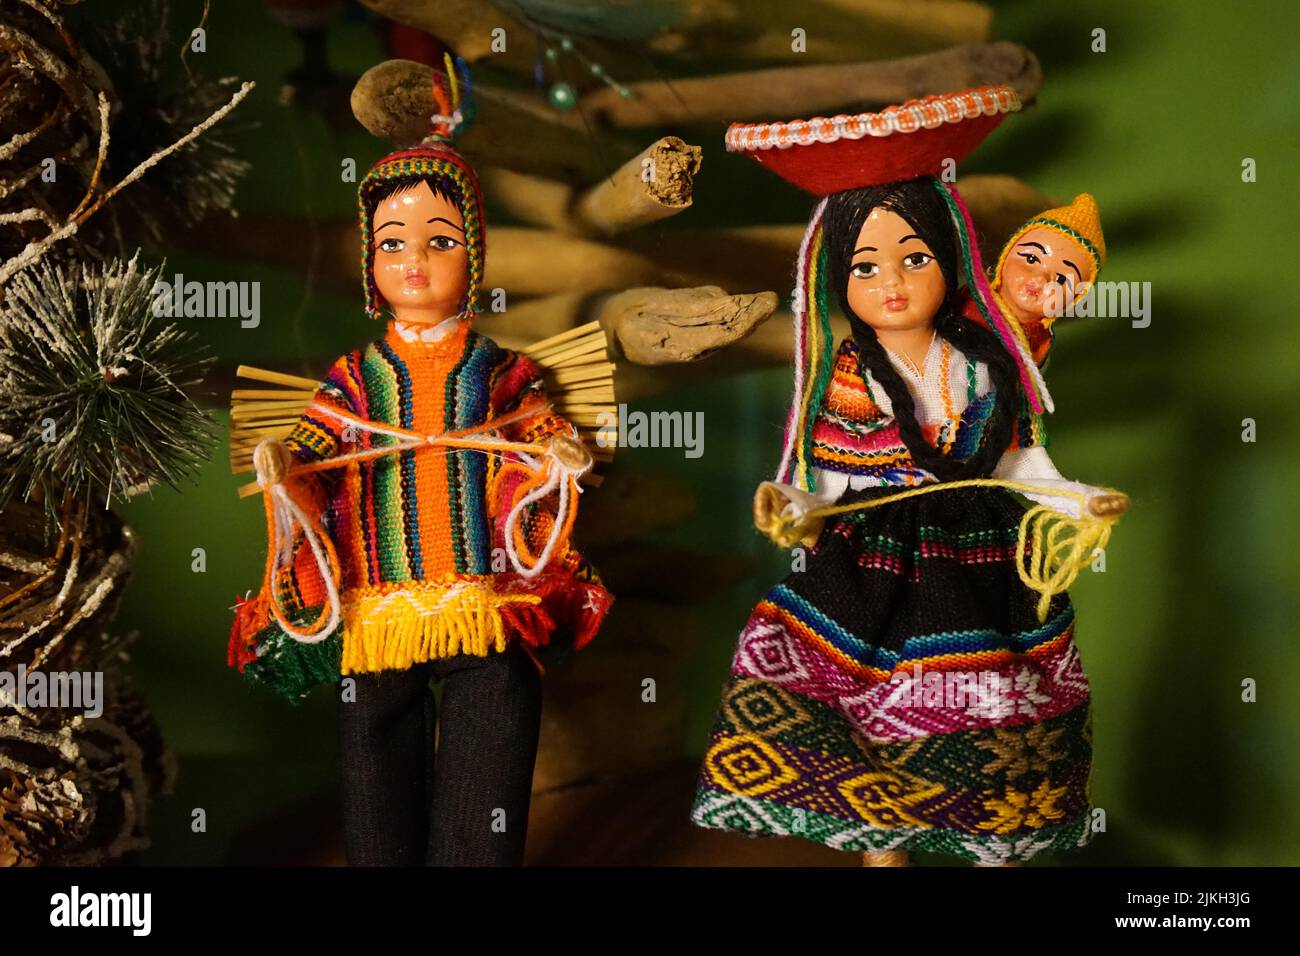 A close-up shot of two dolls in Peruvian costumes Stock Photo